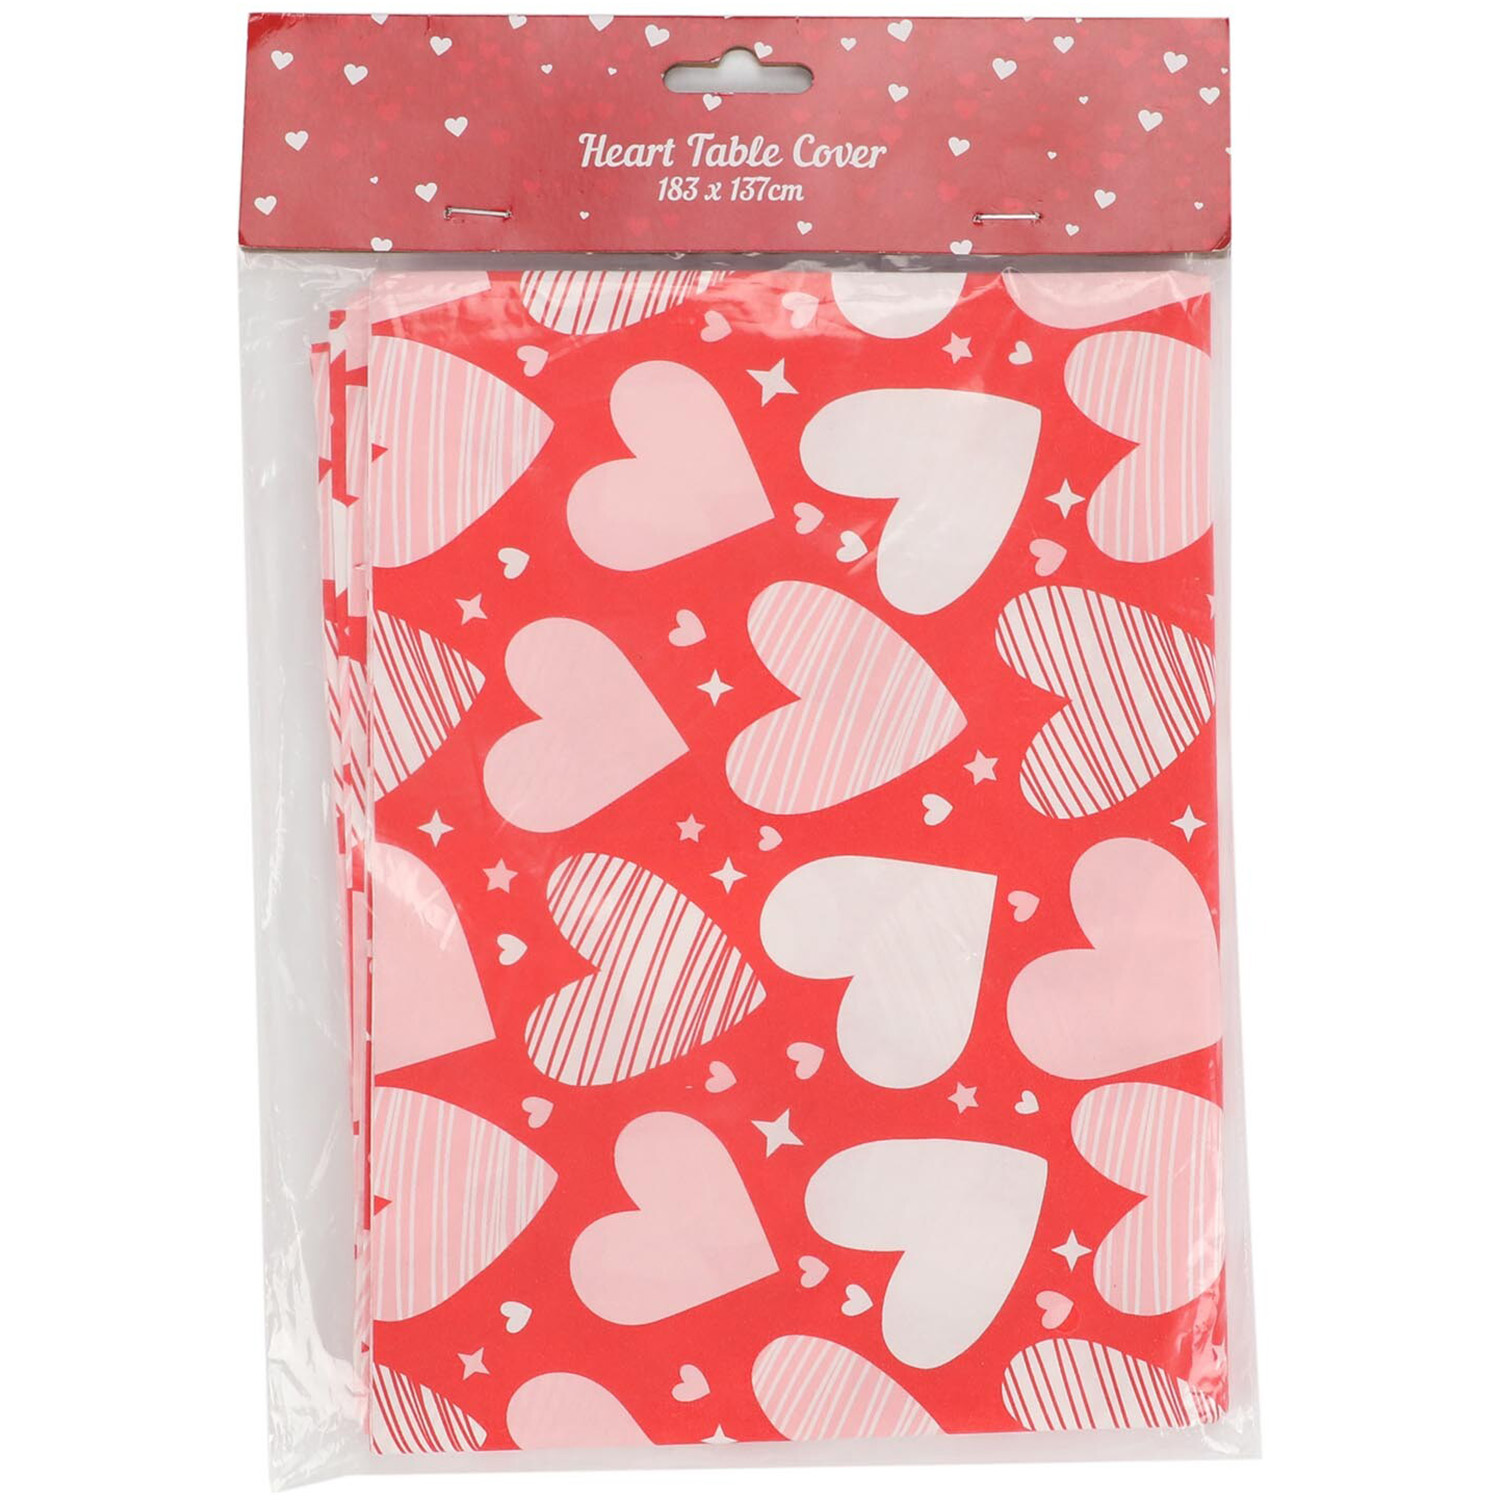 Heart Table Cover - Red Image